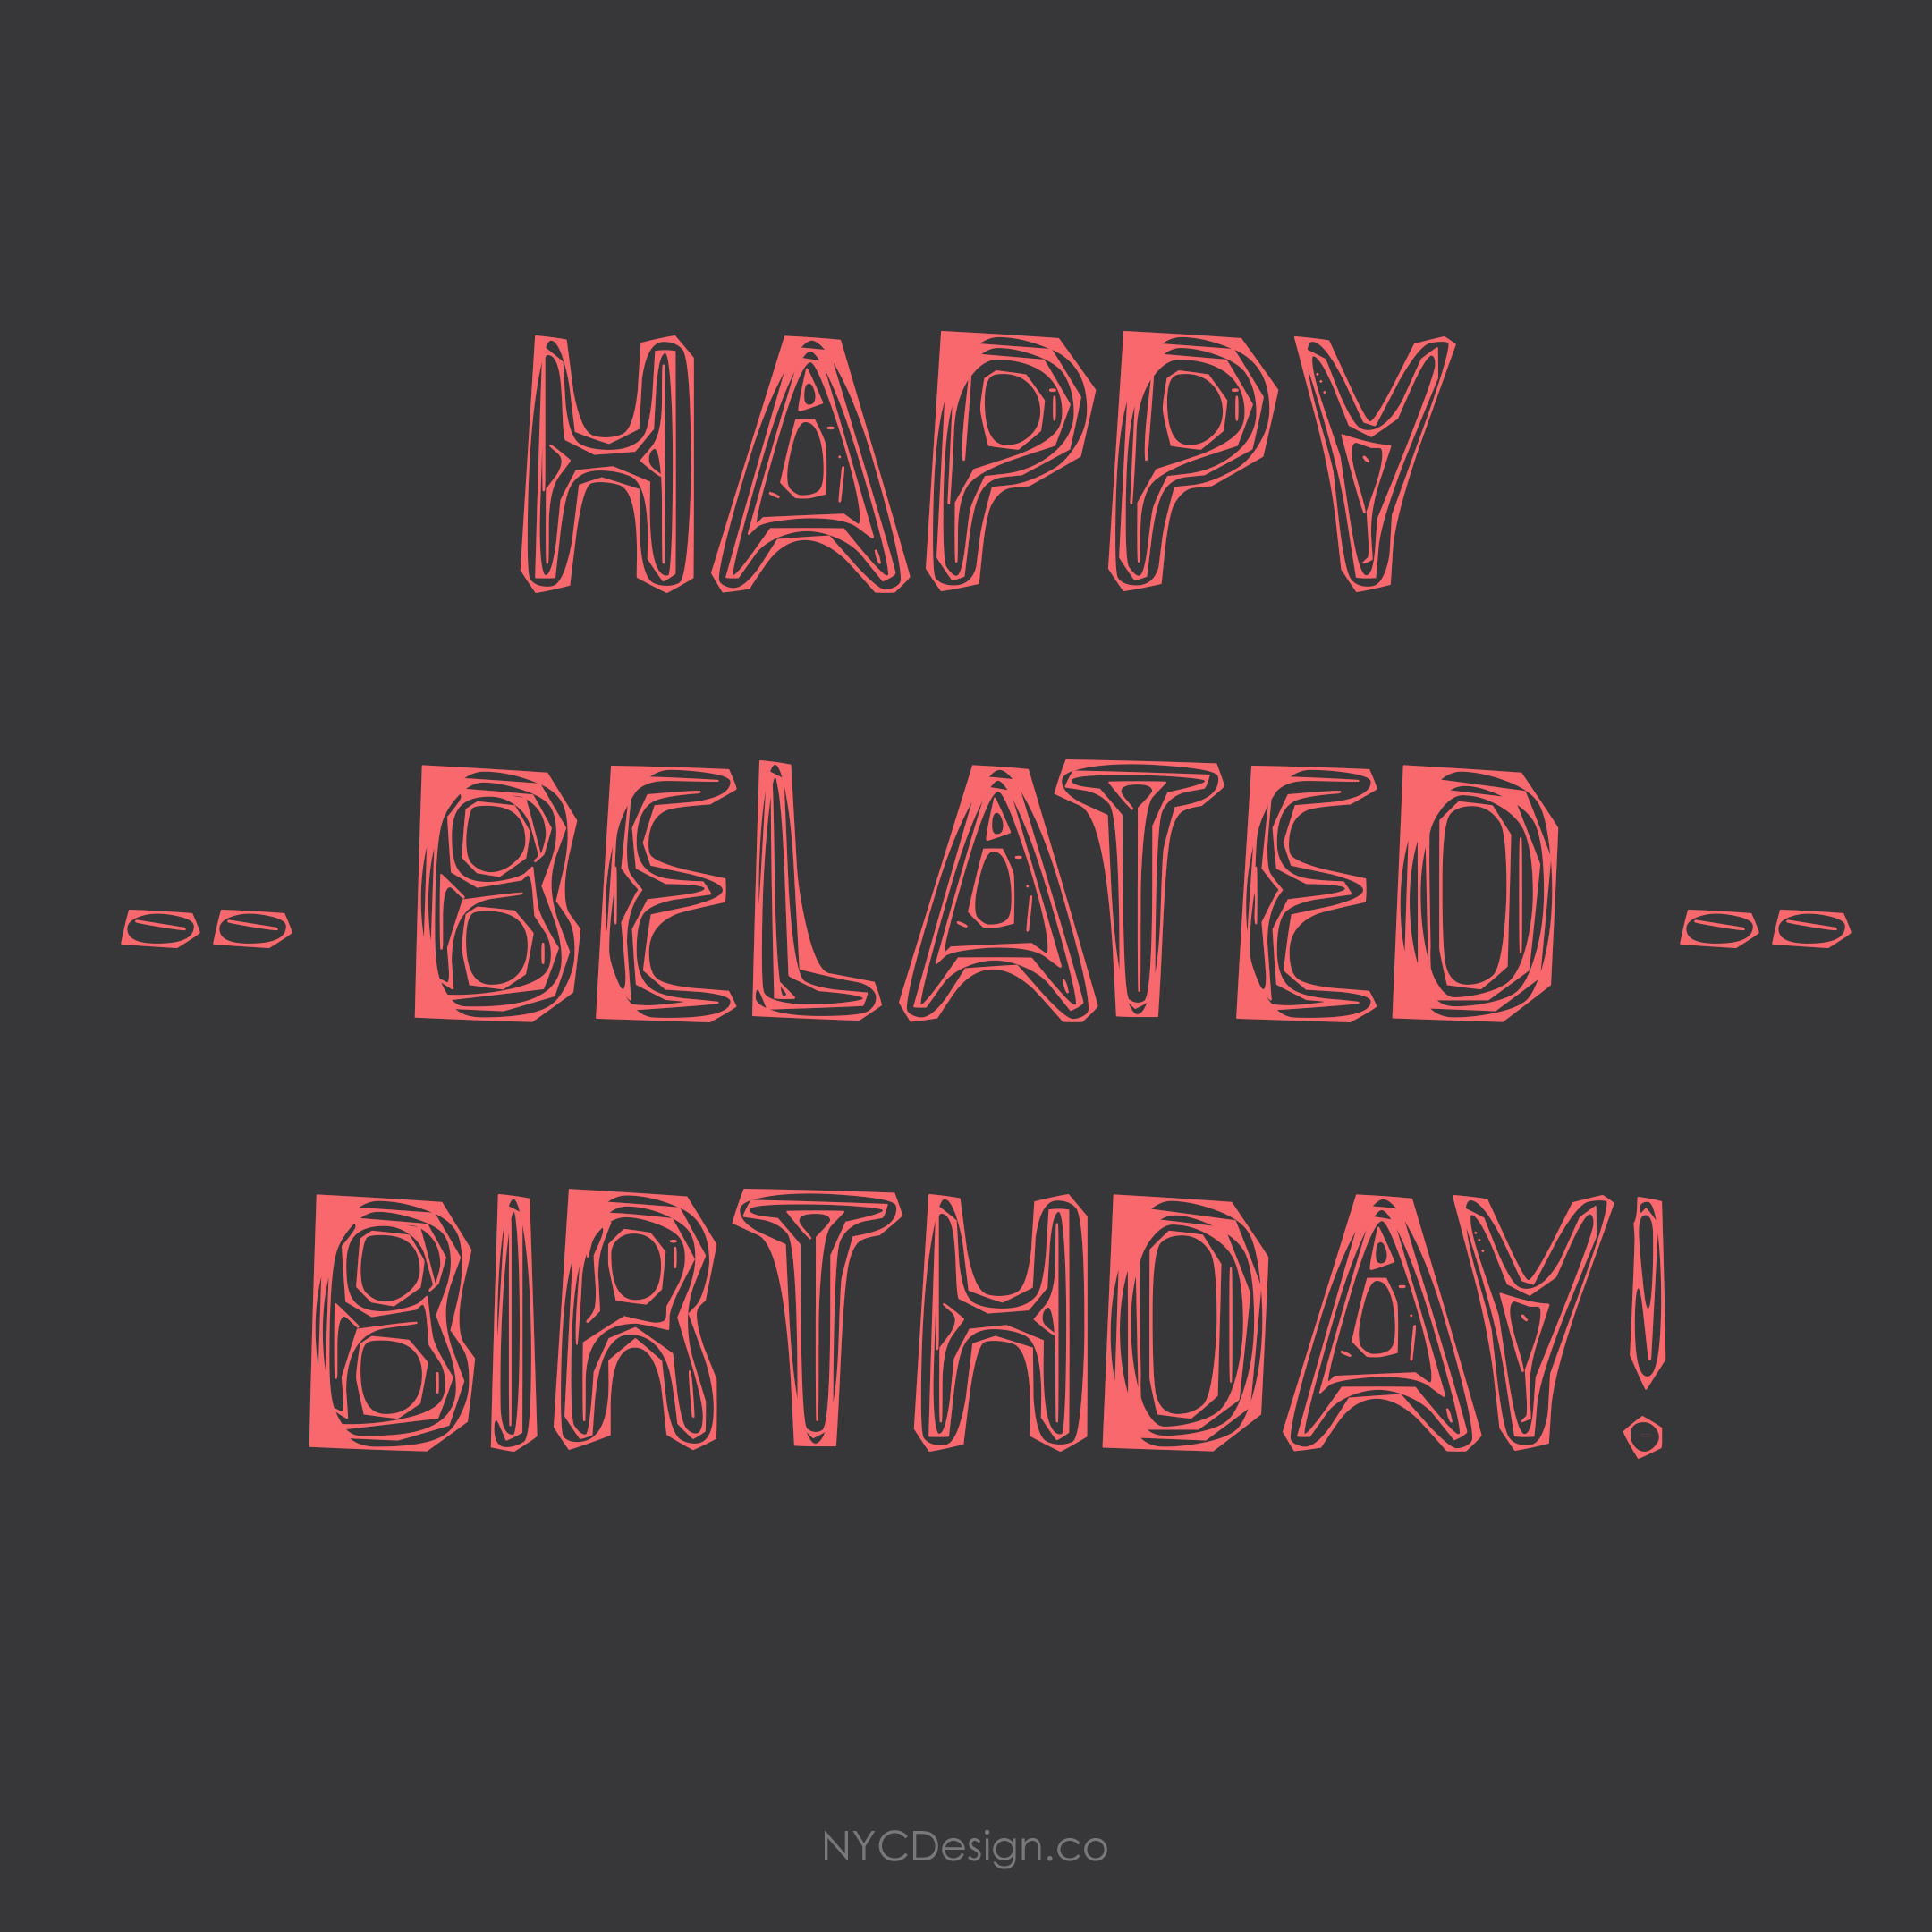 Happy Belated Birthday Card: Black, Red – NYCDesign.co: Printable Things